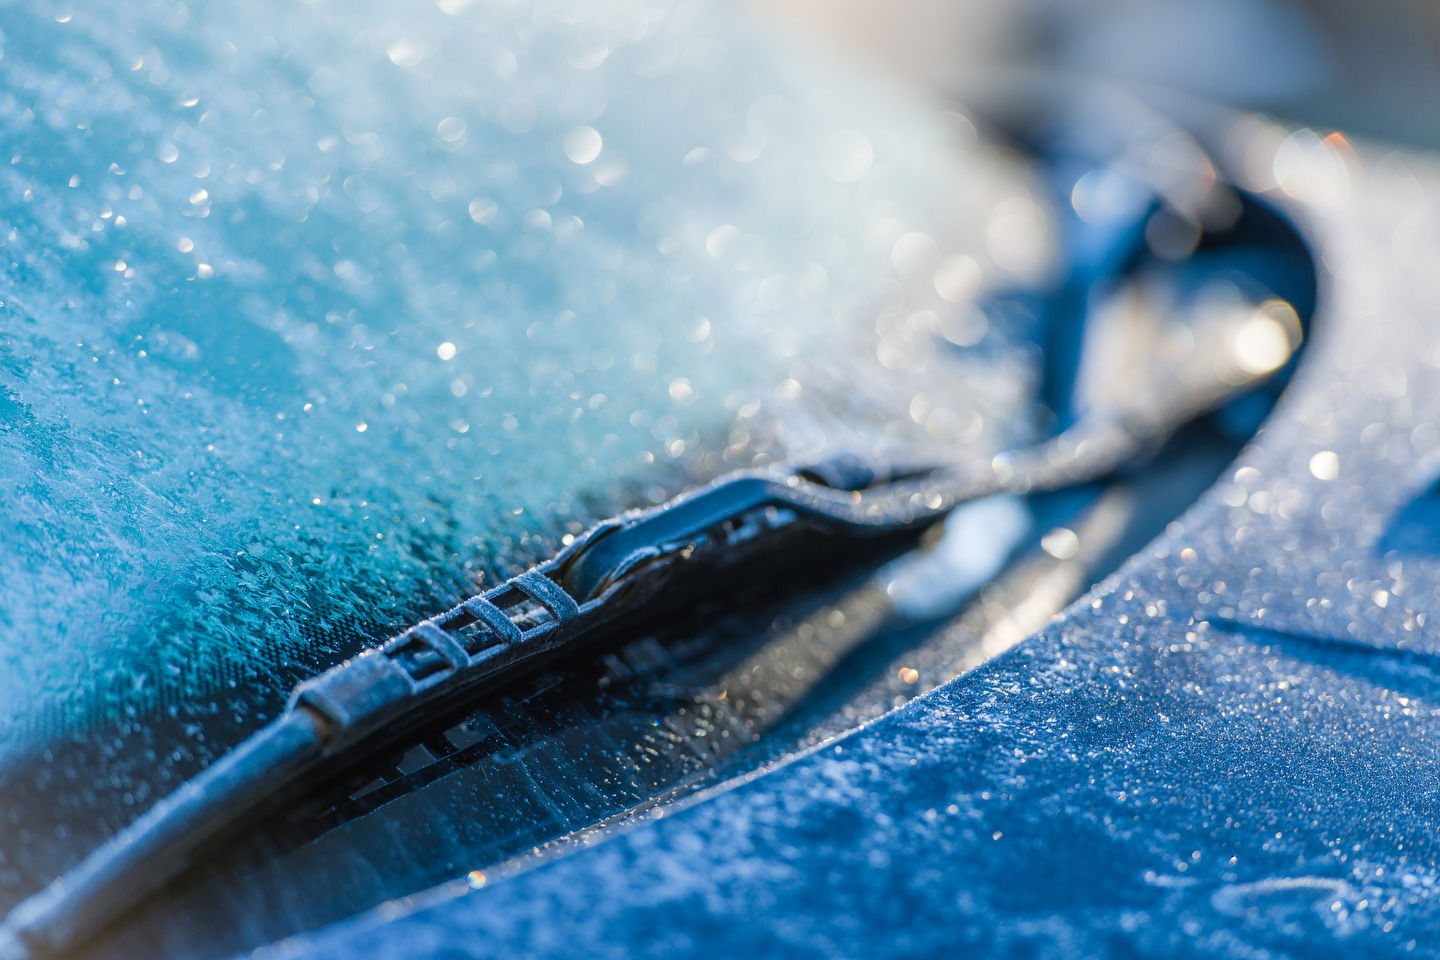 The best Lexus genuine accessories to protect your vehicle this winter